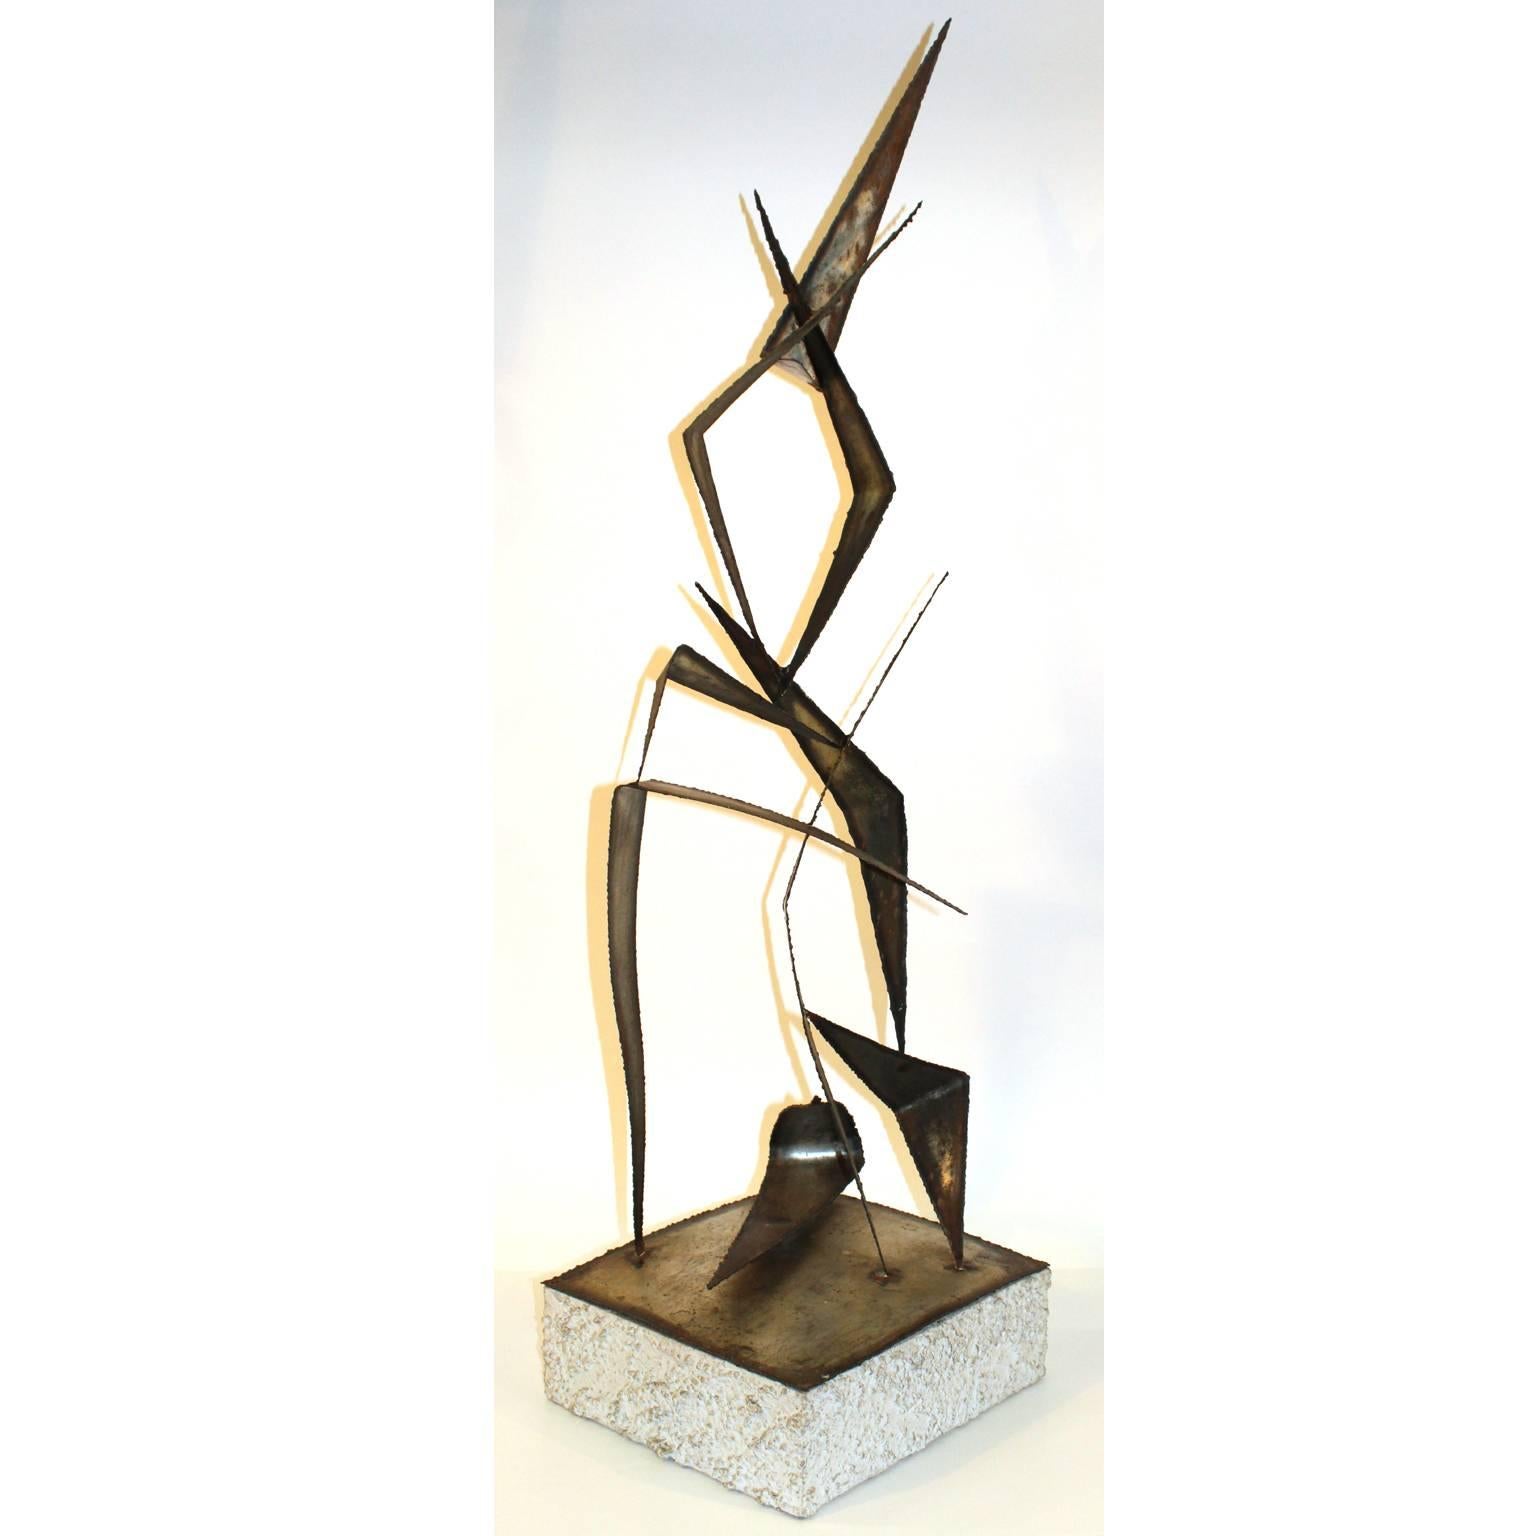 A Curtis Jere 1960s-1970s midcentury Brutalist sculpture made of torched and welded metal on top of a faux cement base. Signed Curtis Jere on the base. Original burnished torched patina and rough finish.